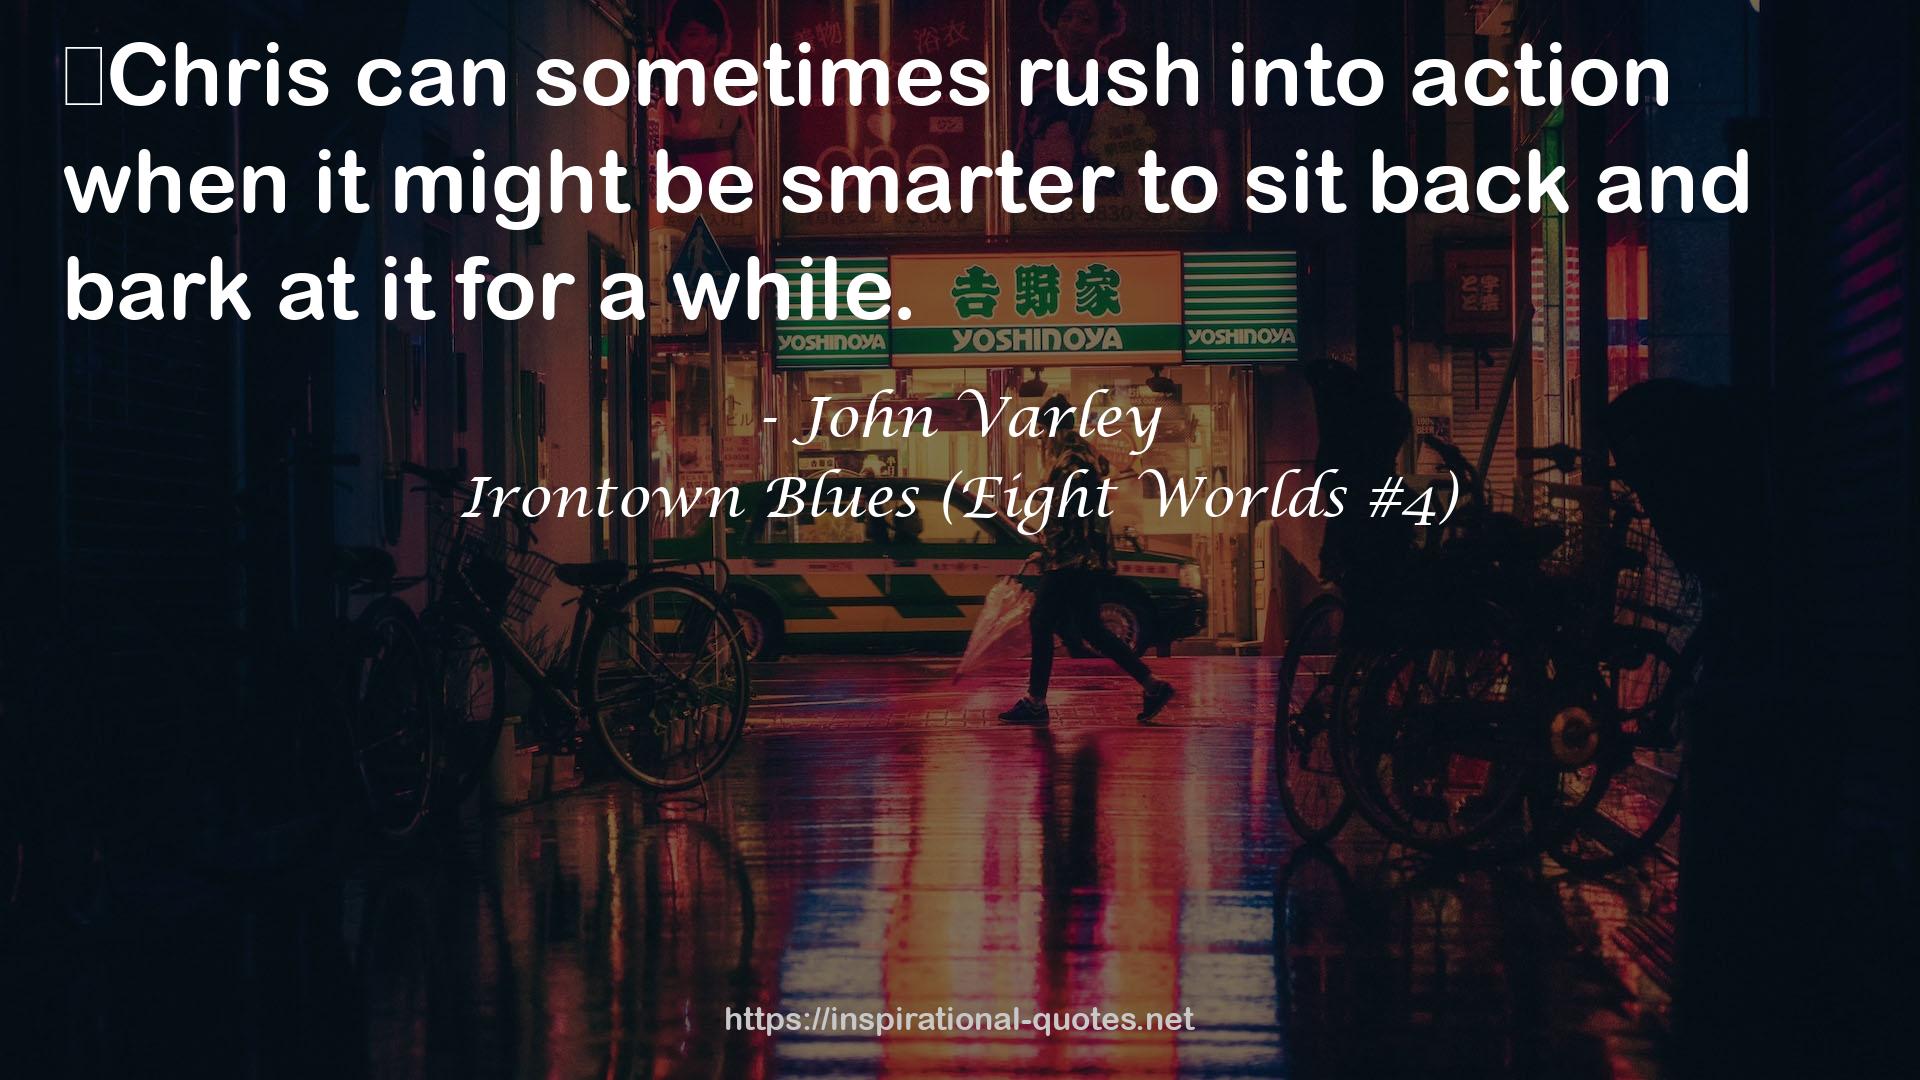 Irontown Blues (Eight Worlds #4) QUOTES